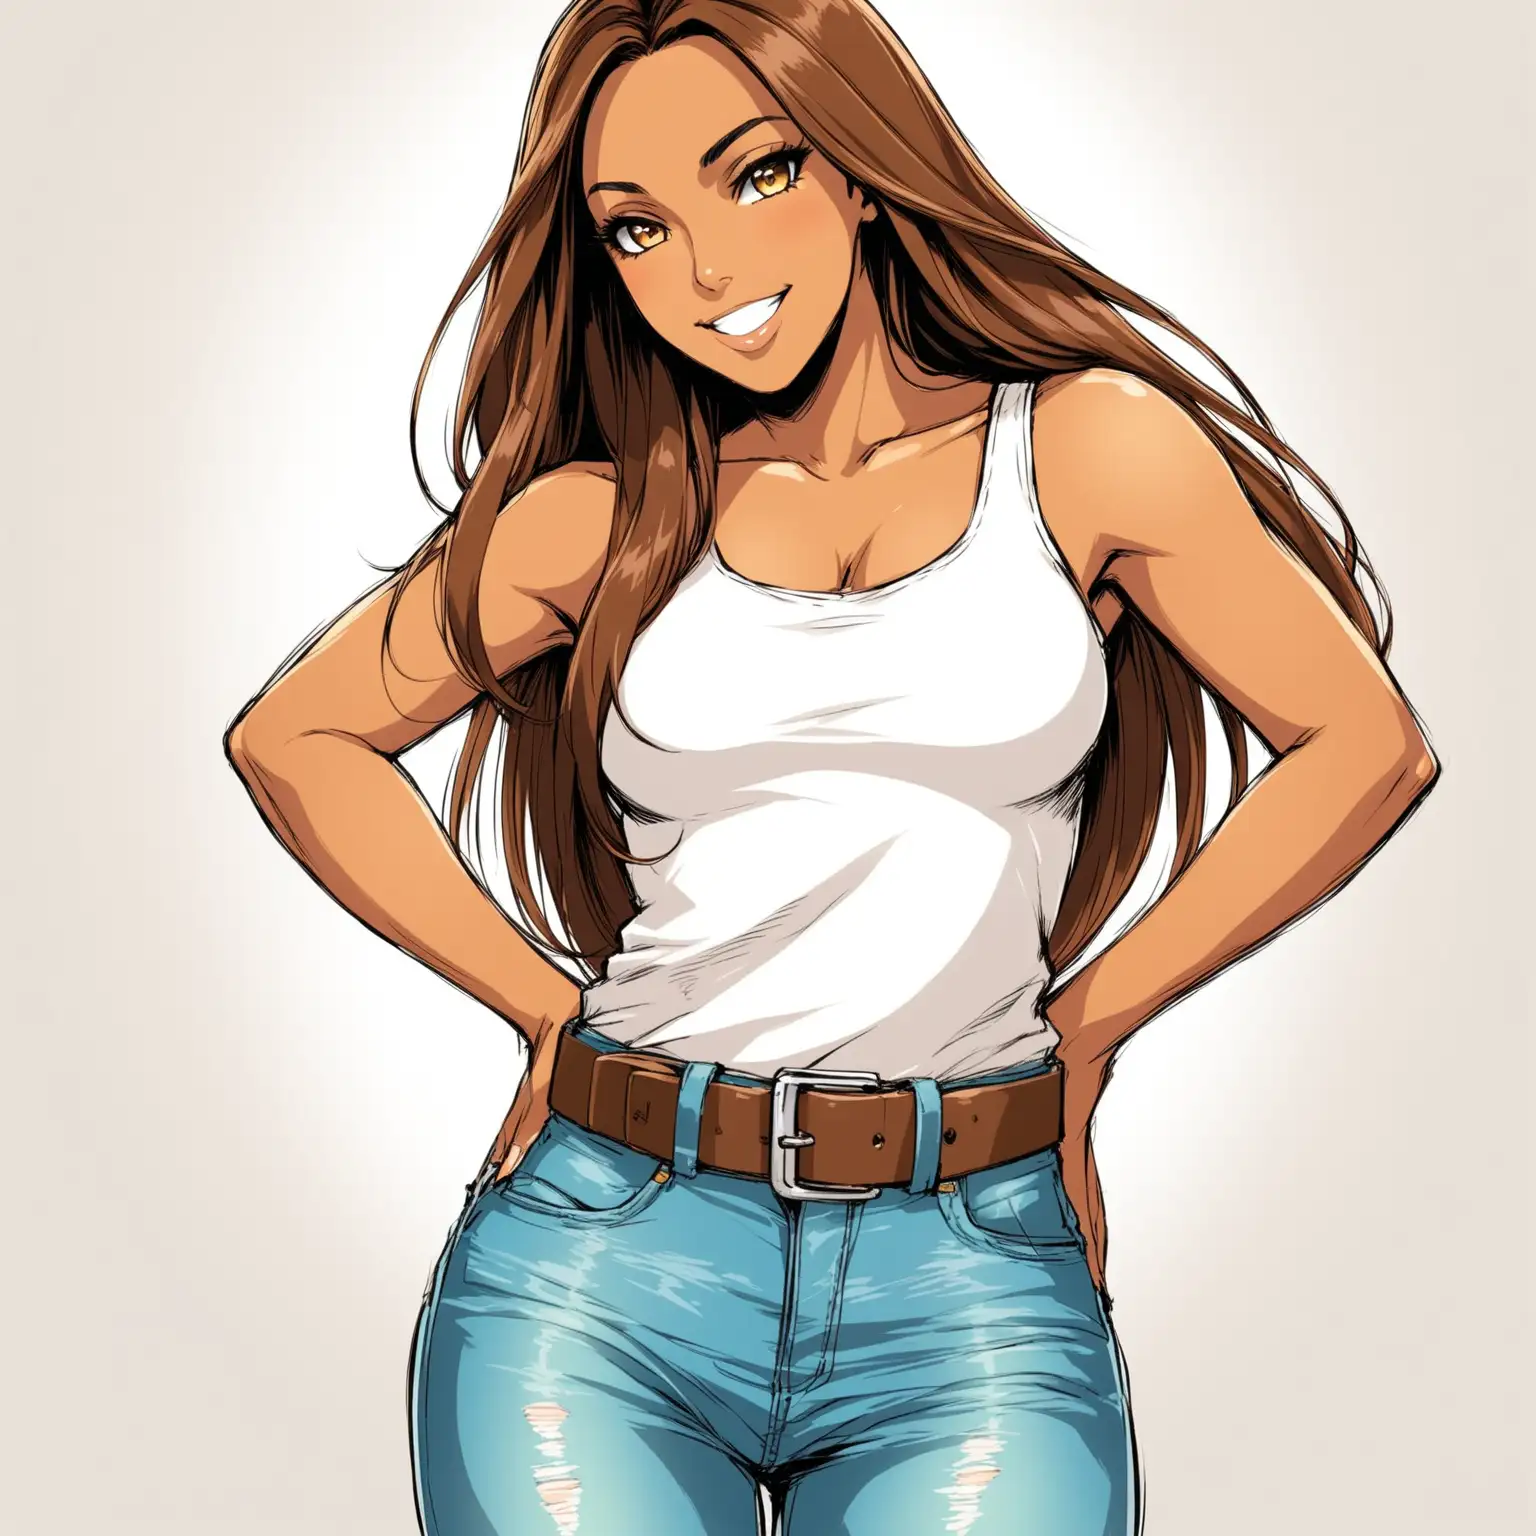 Smiling Woman with Long Brown Hair in Comic Book Style on White Background